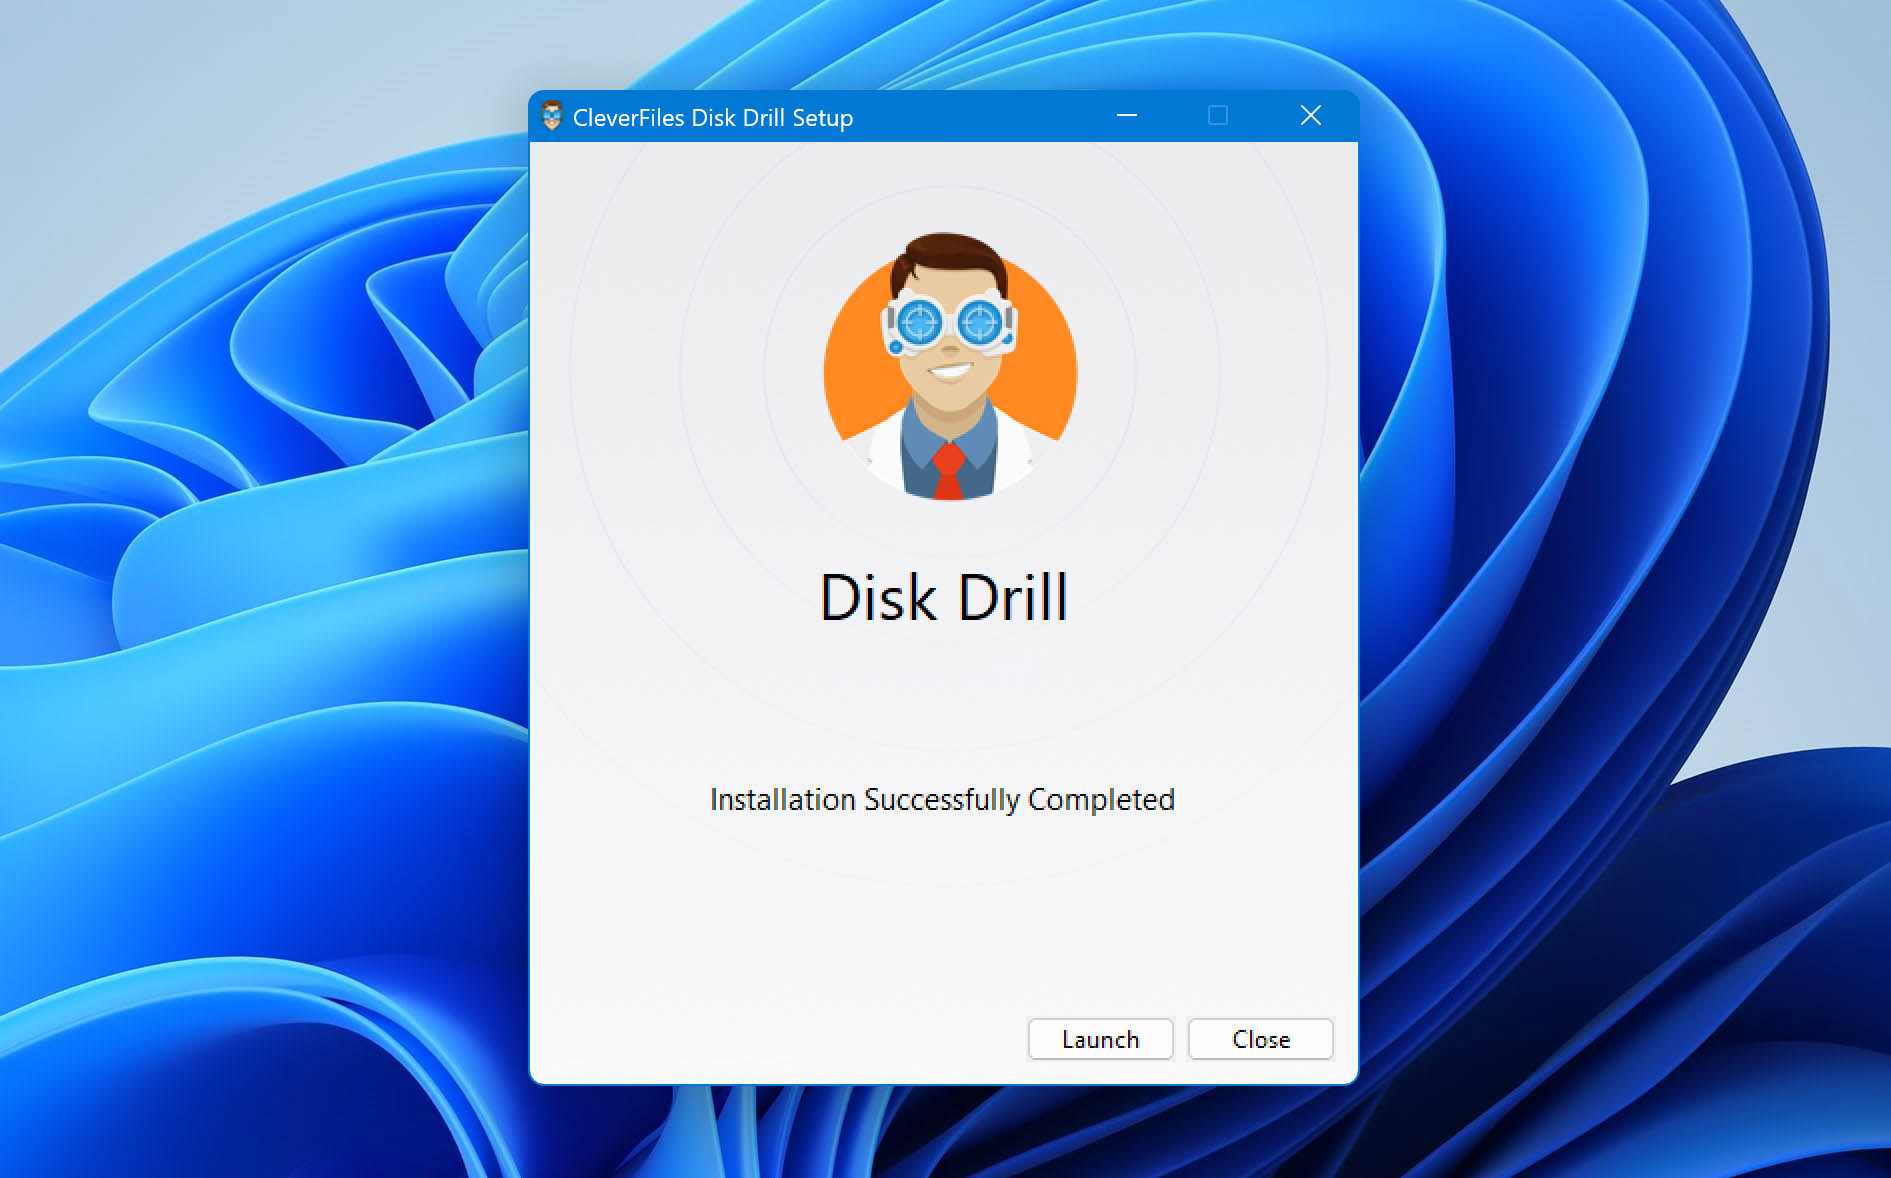 Download and install Disk Drill to your Windows PC